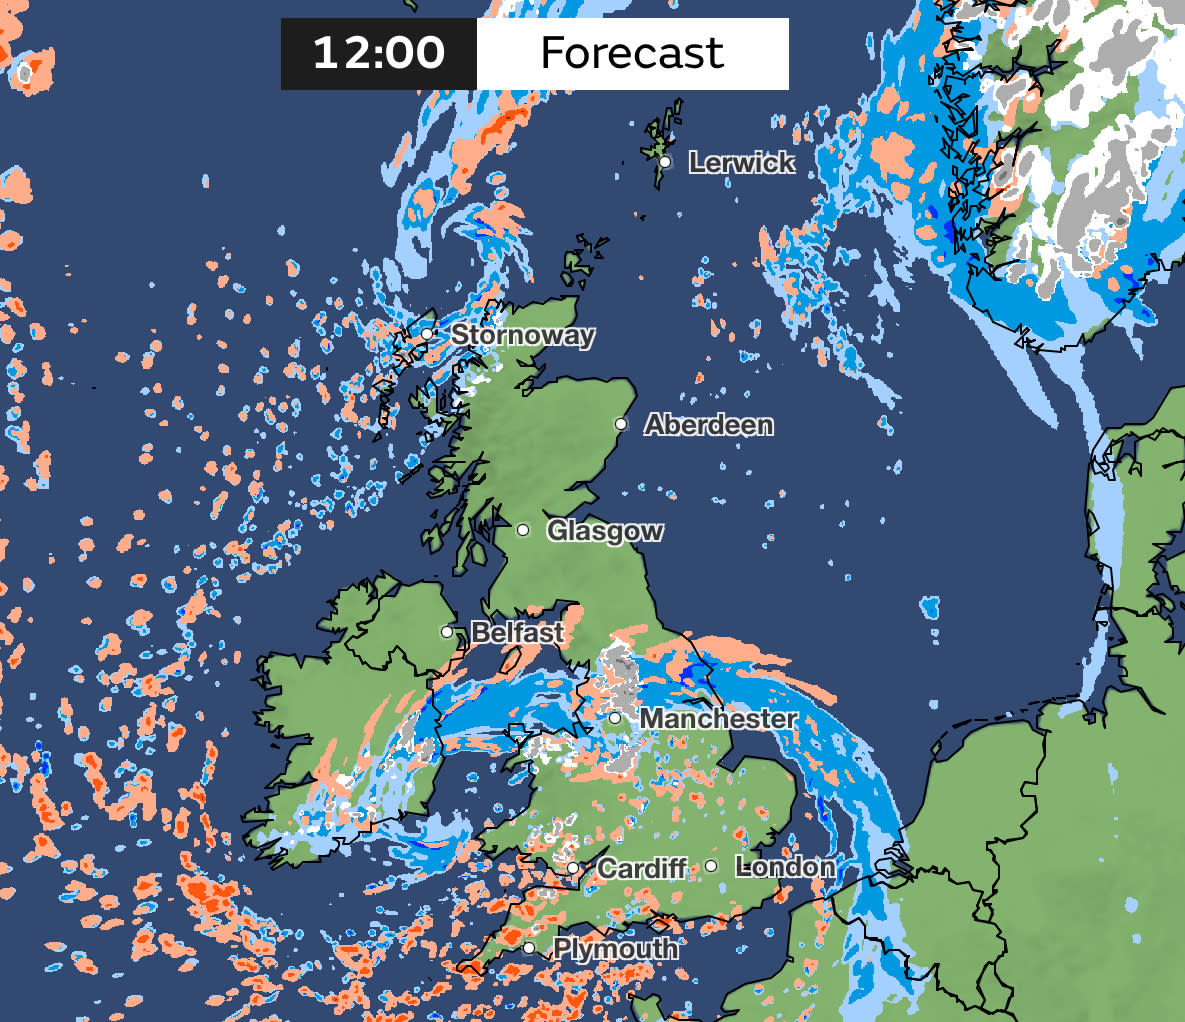 Hail and rain may be felt in the south-west and northerly parts of England on Friday afternoon. (Met Office)